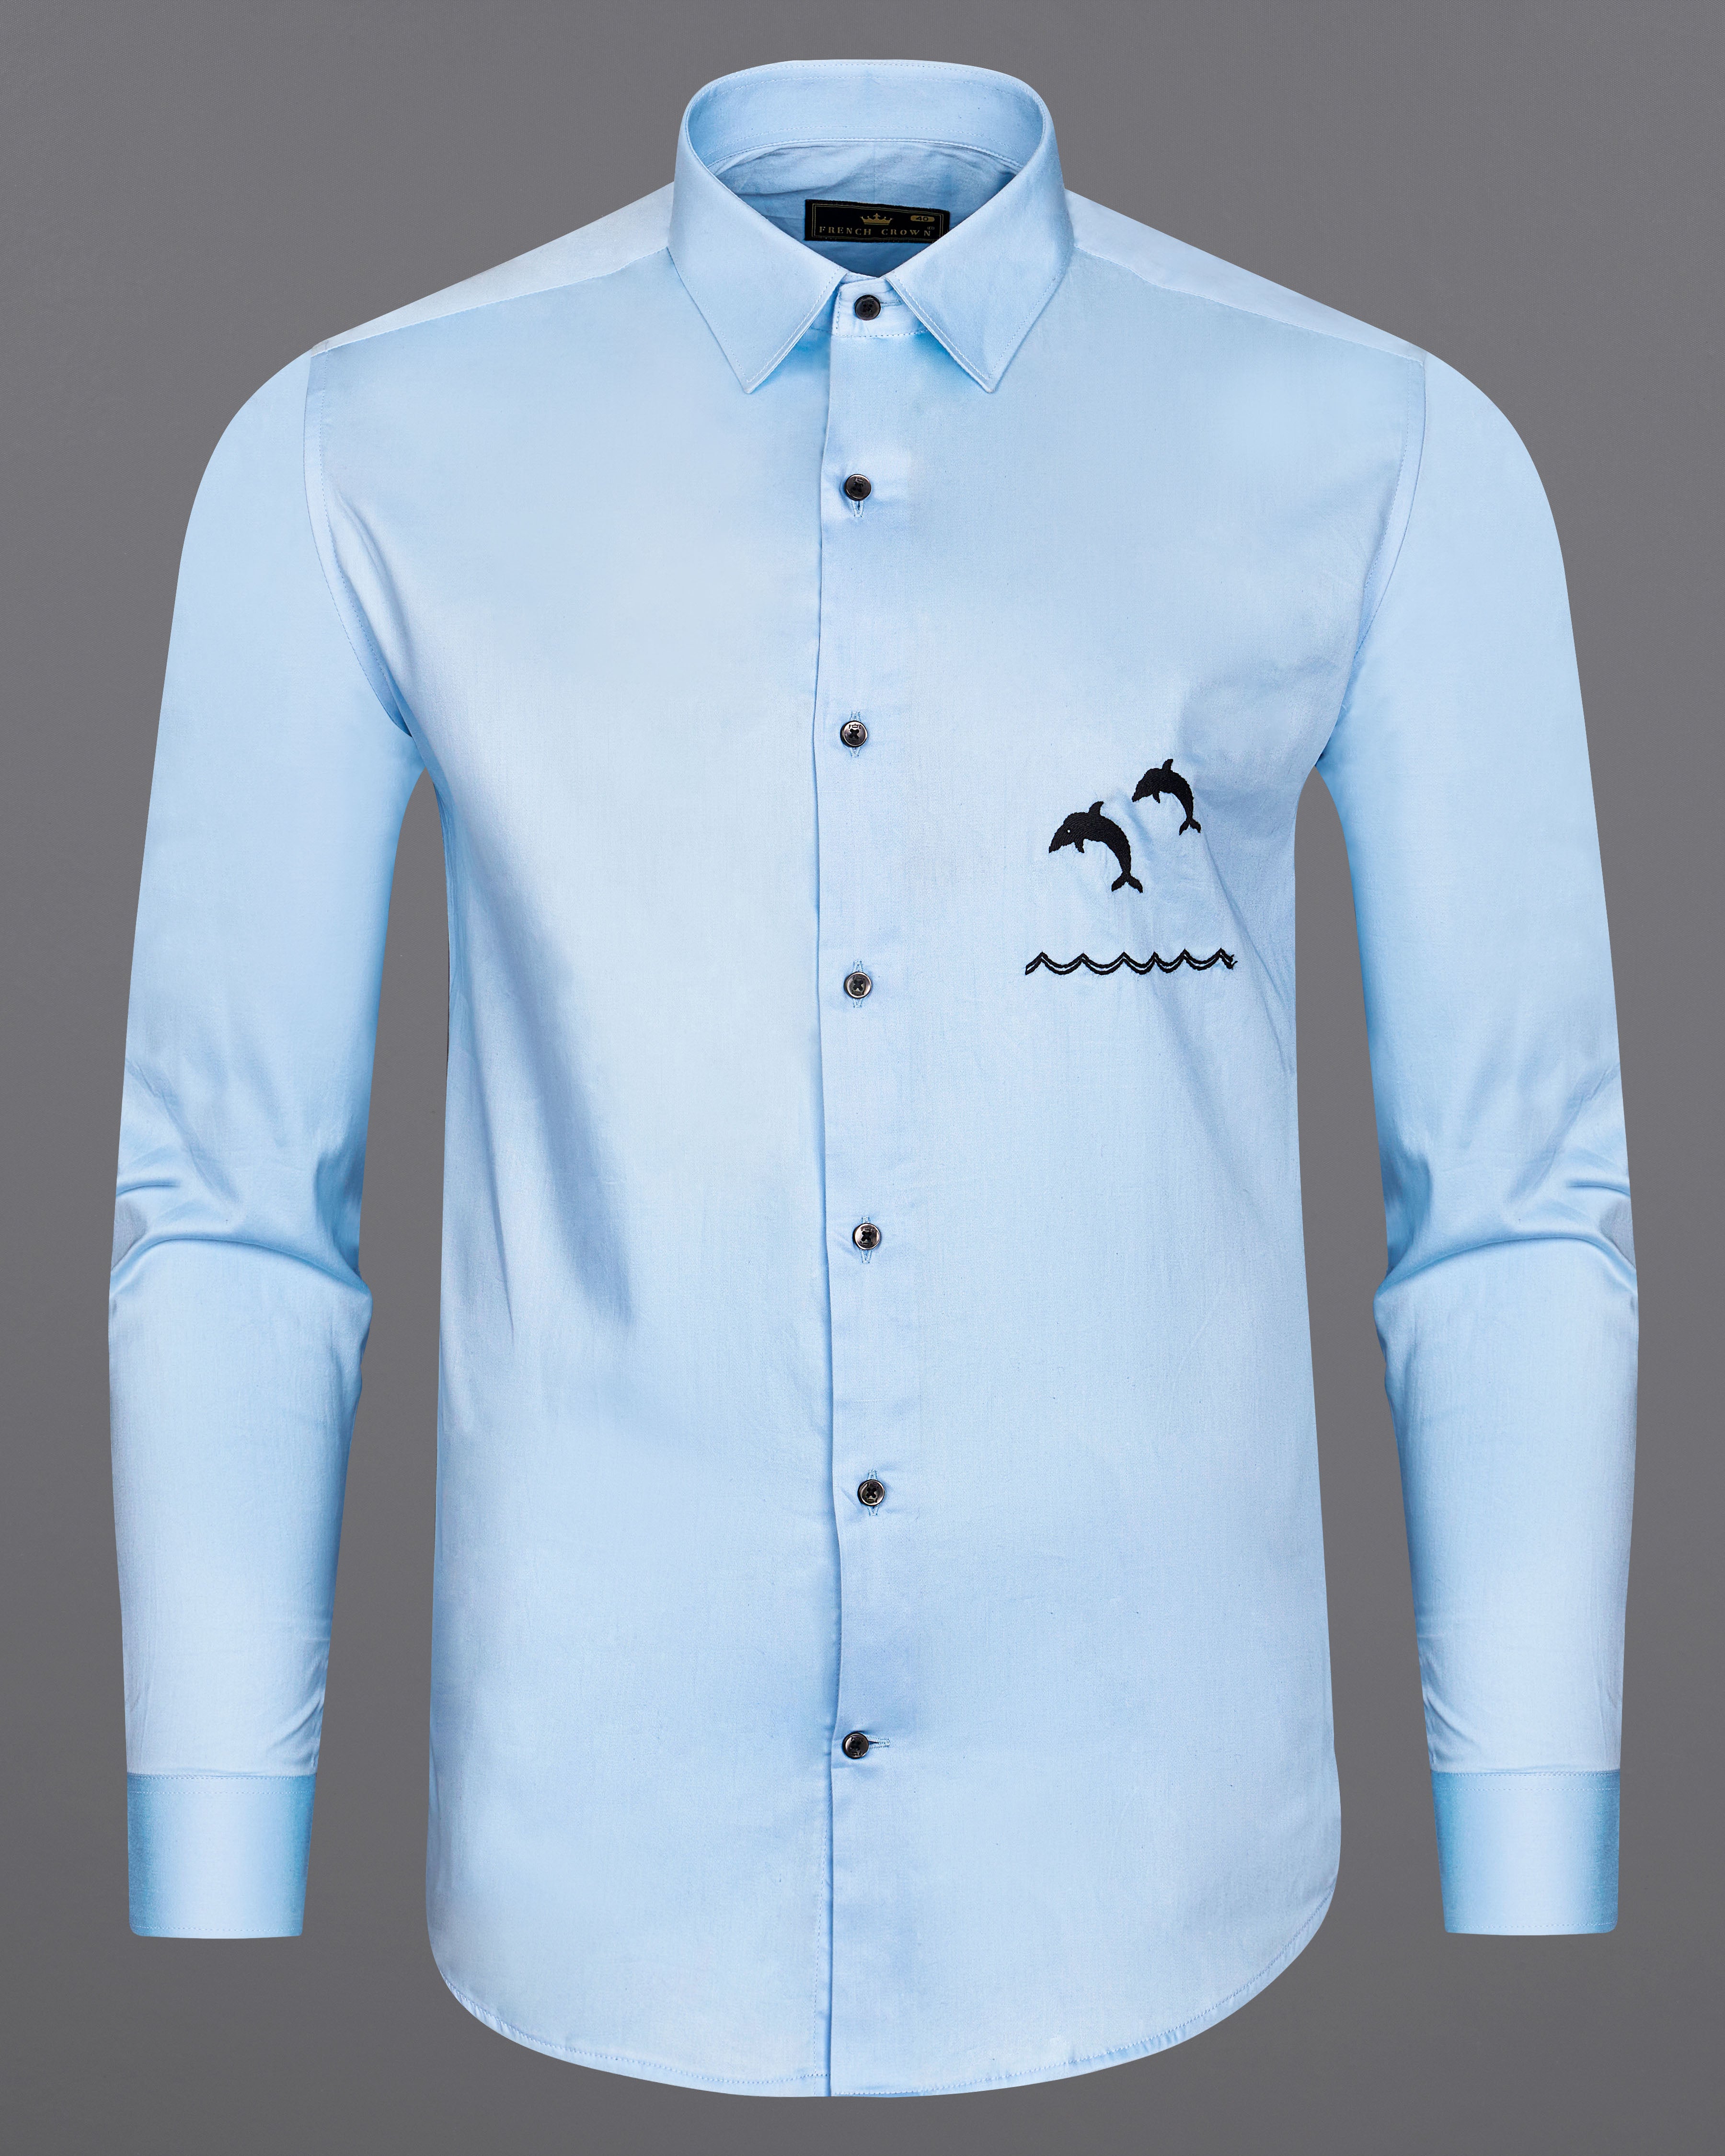 Spindle Blue Fish Embroidered Super Soft Premium Cotton Shirt 8945-BLK-E021-38, 8945-BLK-E021-H-38, 8945-BLK-E021-39, 8945-BLK-E021-H-39, 8945-BLK-E021-40, 8945-BLK-E021-H-40, 8945-BLK-E021-42, 8945-BLK-E021-H-42, 8945-BLK-E021-44, 8945-BLK-E021-H-44, 8945-BLK-E021-46, 8945-BLK-E021-H-46, 8945-BLK-E021-48, 8945-BLK-E021-H-48, 8945-BLK-E021-50, 8945-BLK-E021-H-50, 8945-BLK-E021-52, 8945-BLK-E021-H-52